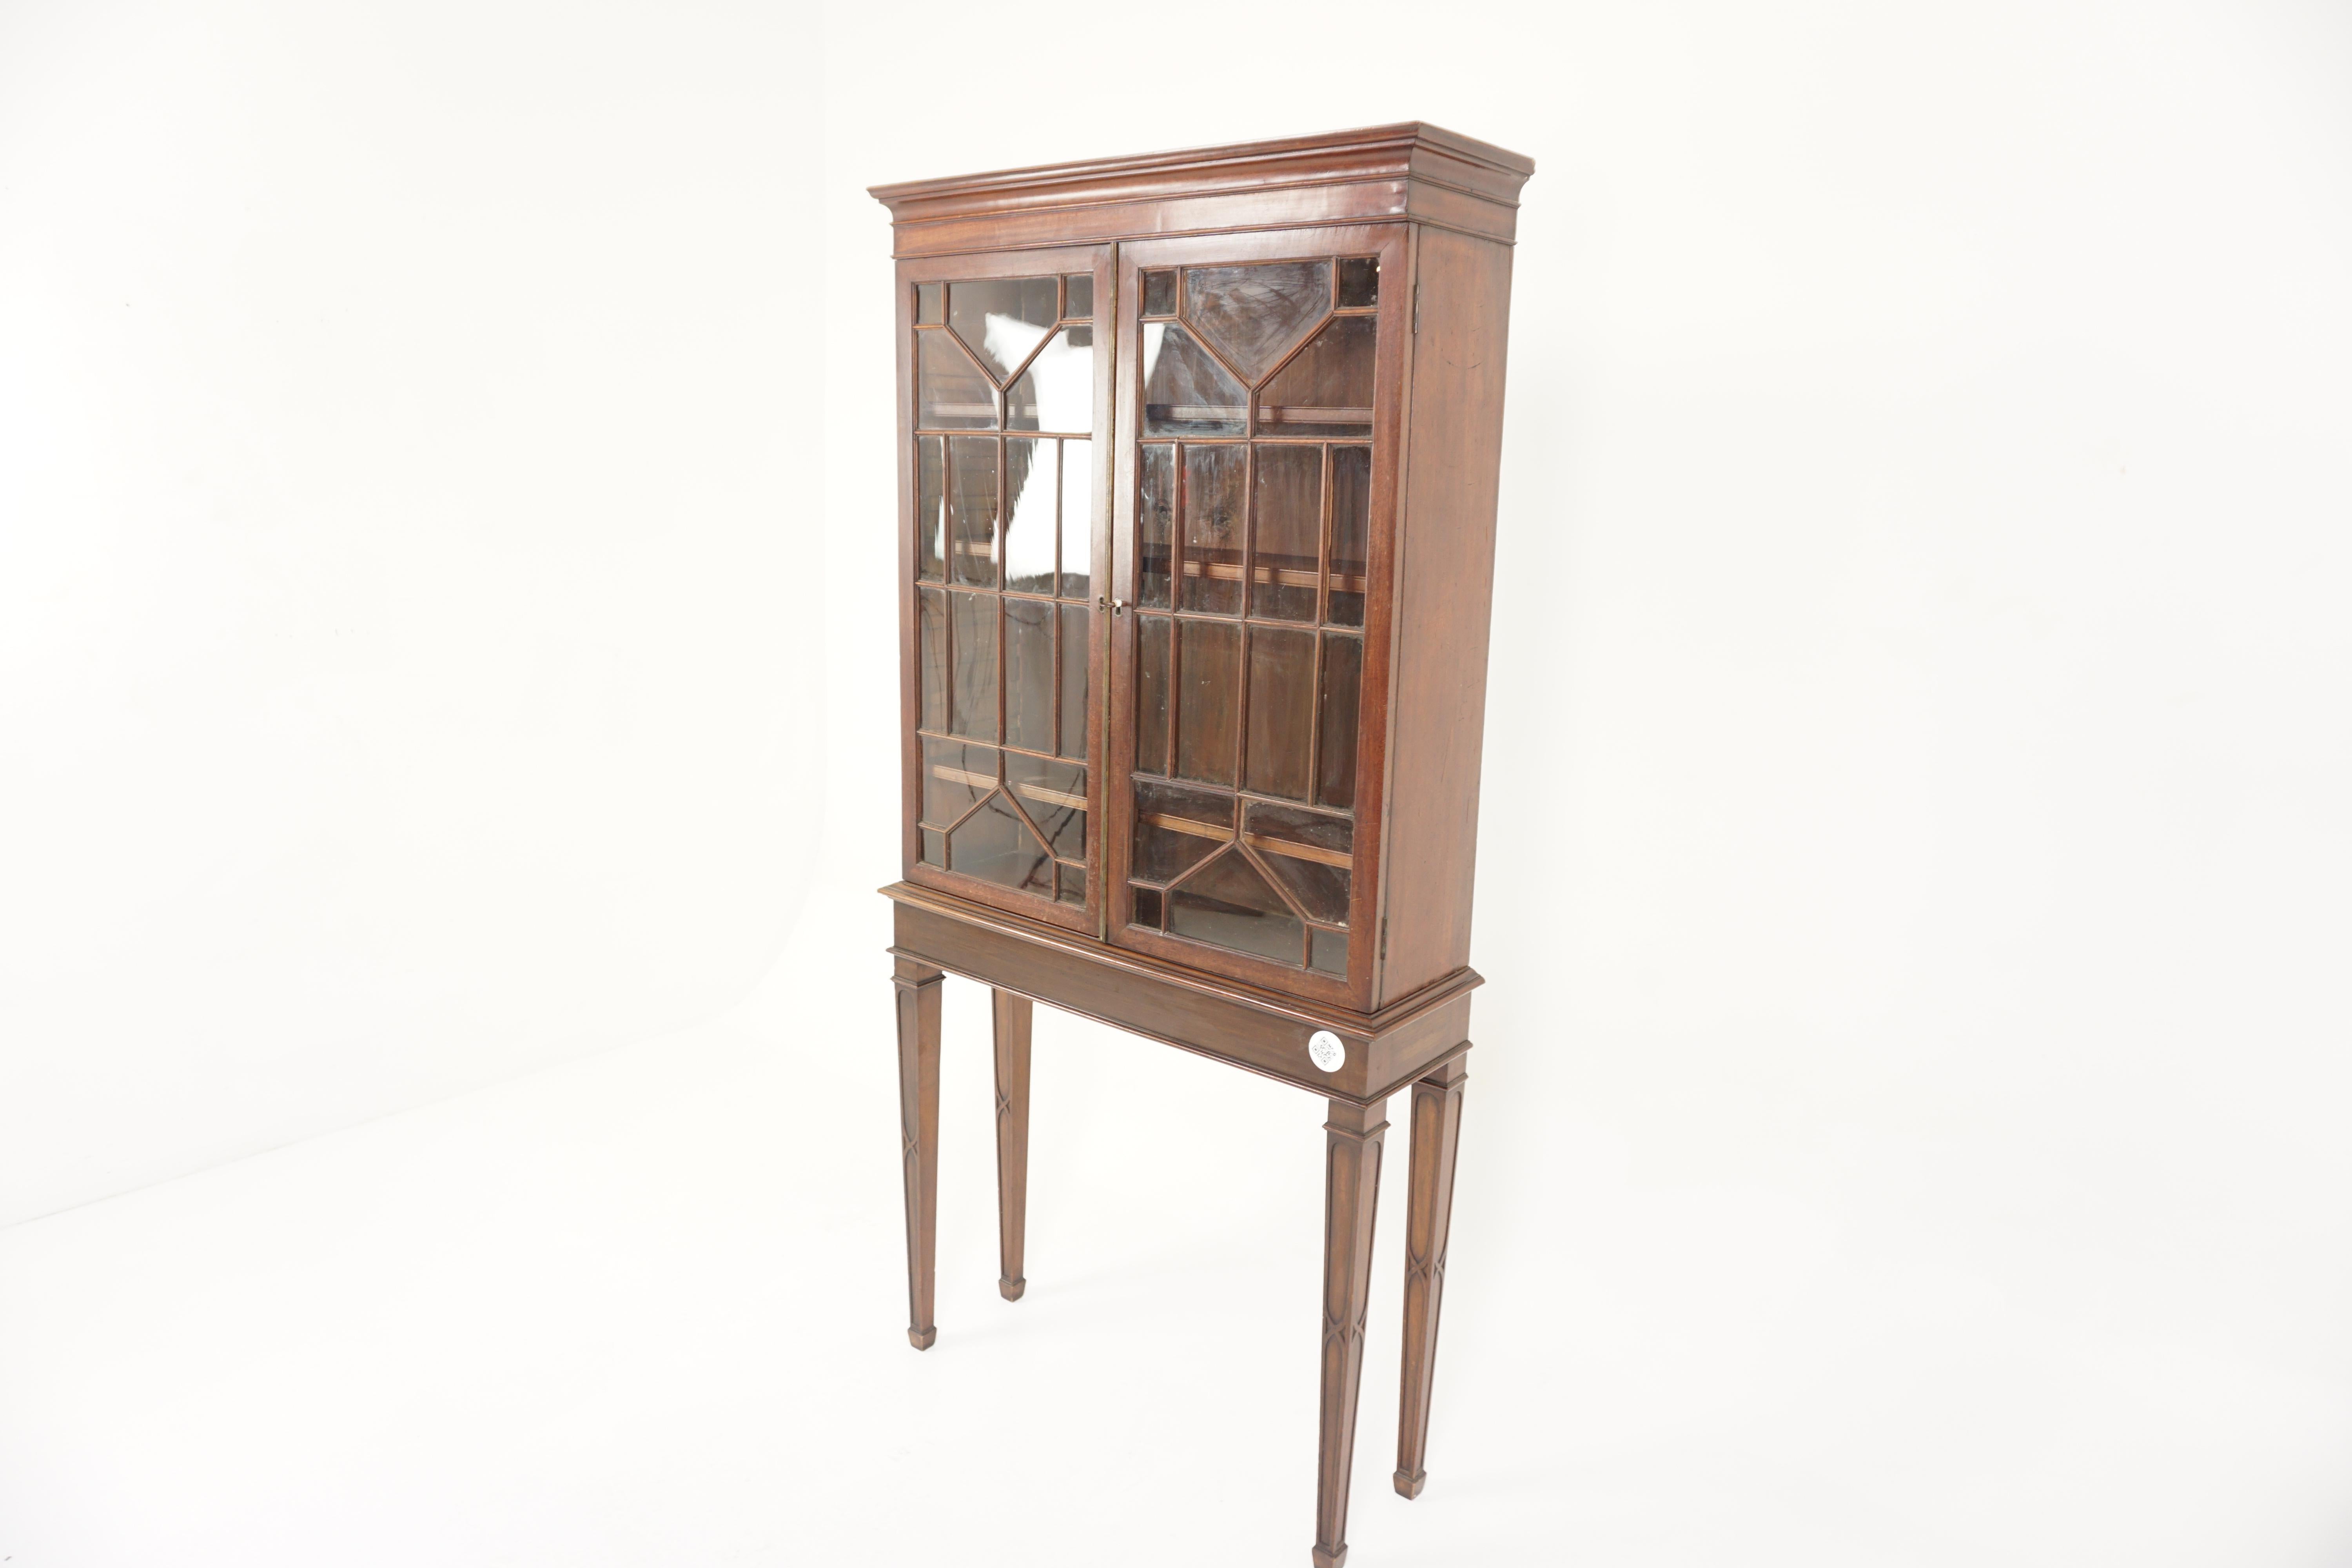 Georgian Sheraton style cabinet on stand, Scotland 1910, H823

Scotland 1910
Solid walnut
Original finish
Rectangular moulded top
Original glass doors with geometric moulding to the front
Opens to reveal 3 slide out shelves
Original working